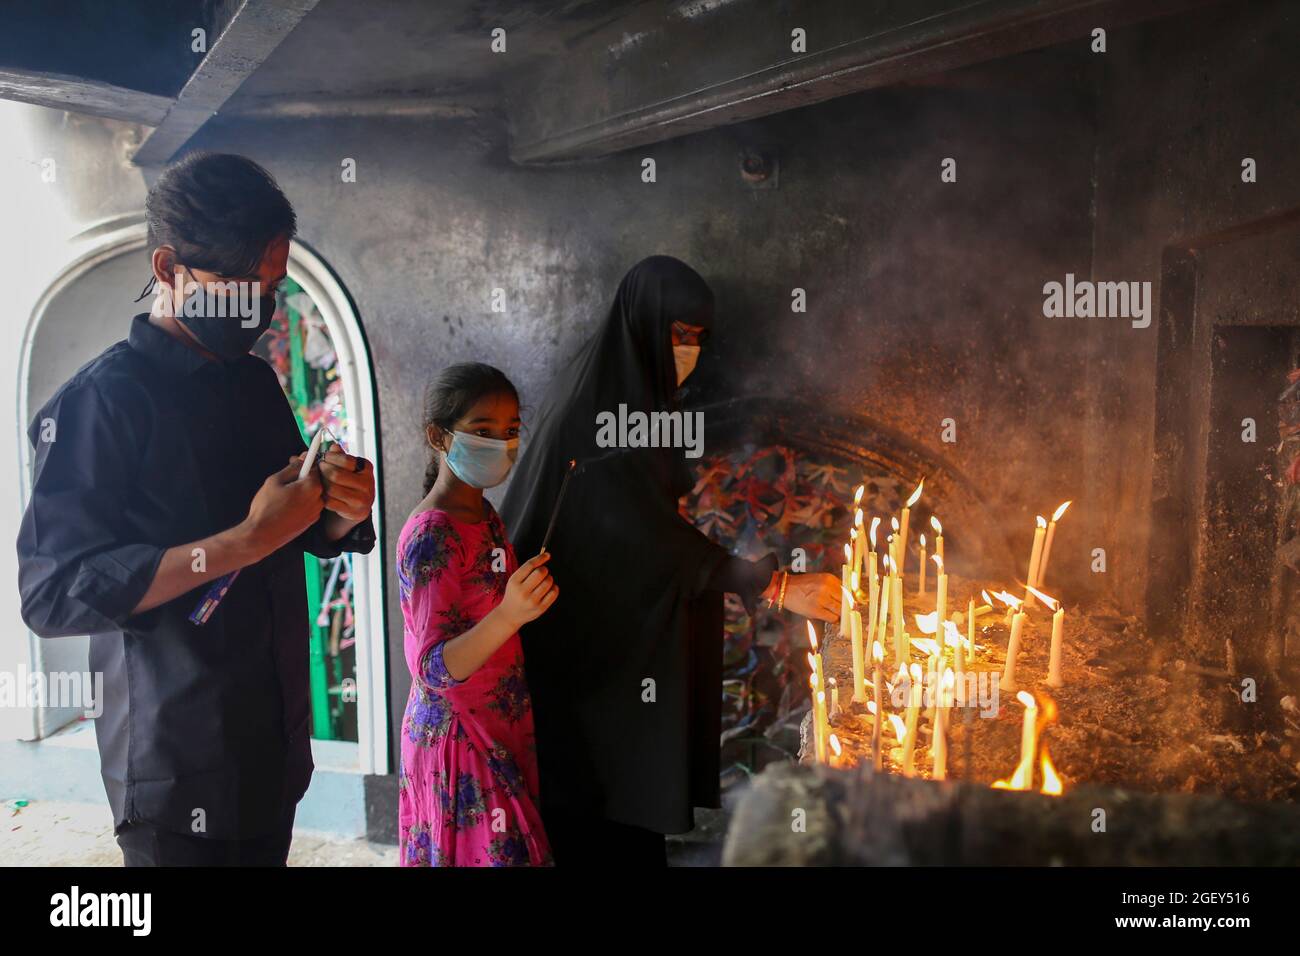 DHAKA, BANGLADESH, AUGUST 20: A Shia muslim woman lights a candle and pray for imam hussain, at Husani-dalan. Musilm People take part during  a religious procession in the month of Muharram on the occasion to commemorate  Ashura Day. Ashura is the tenth day of Muharram, the first month of the Islamic calendar commemorating the martyrdom of Imam Hussein, the grandson of the Prophet hazrat Muhammad. On August 20, 2021 in Dhaka, Bangladesh. Stock Photo